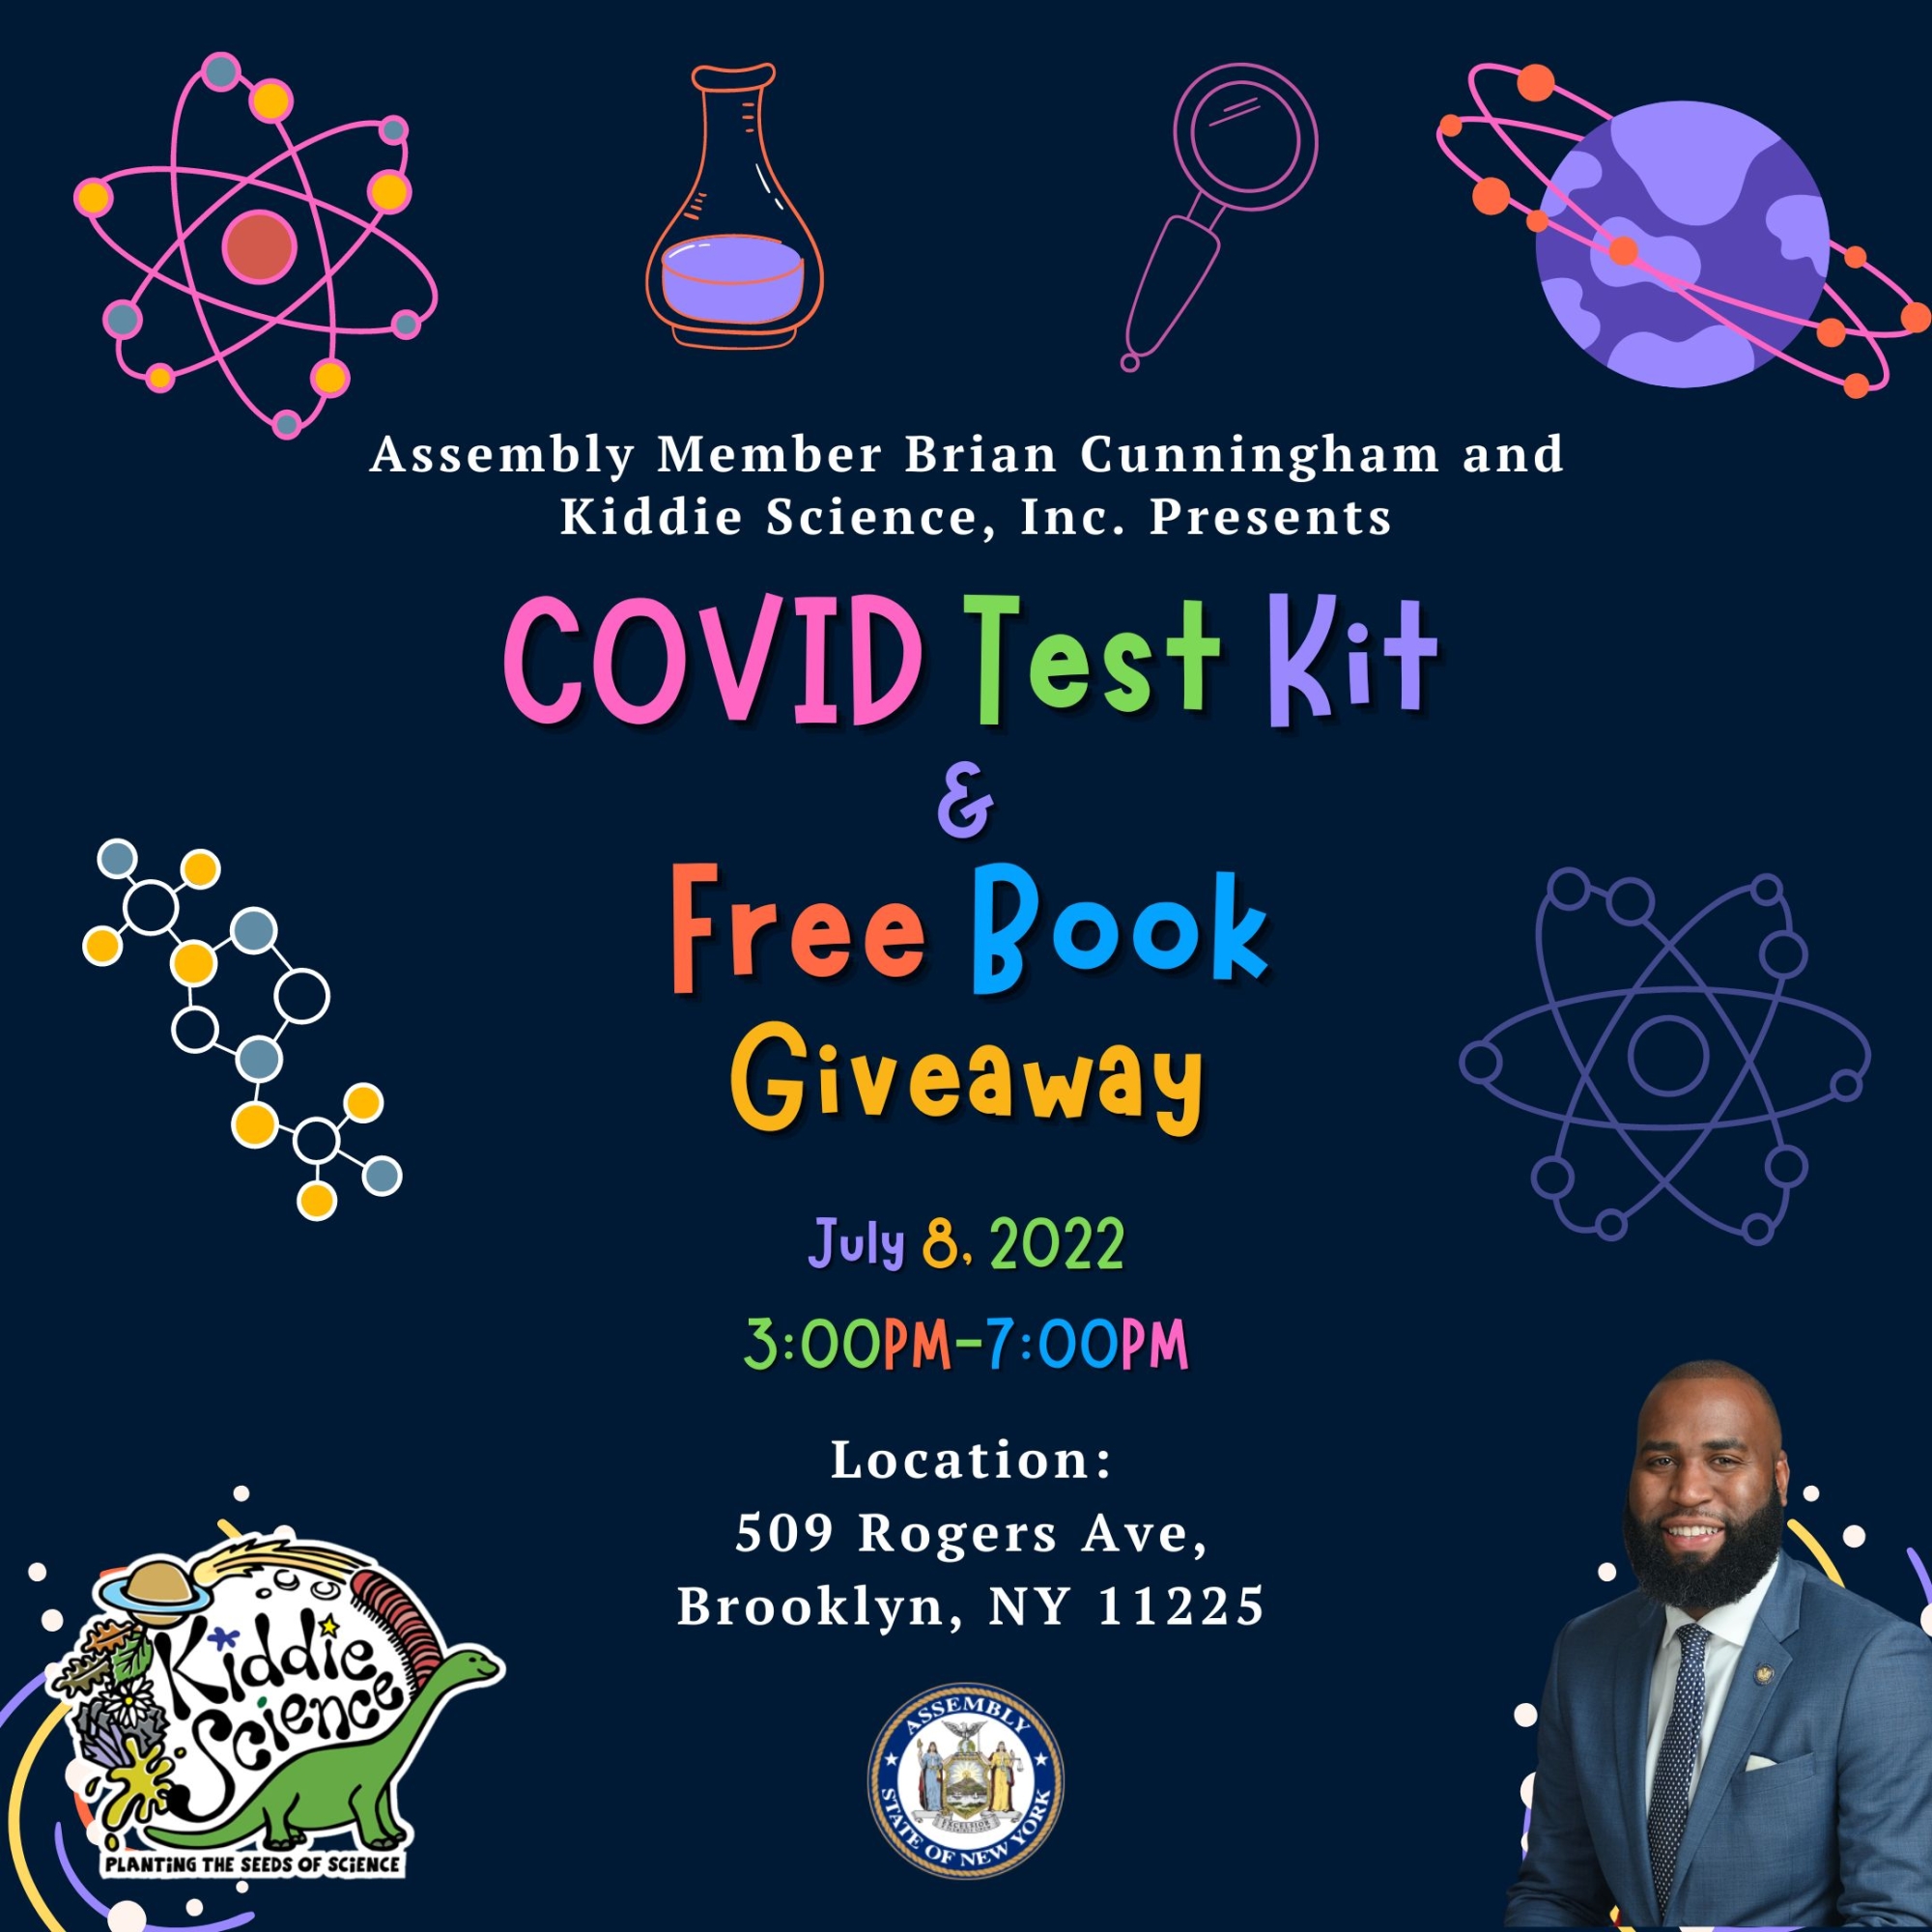 COVID Test Kit & Free Book Giveaway July 2022